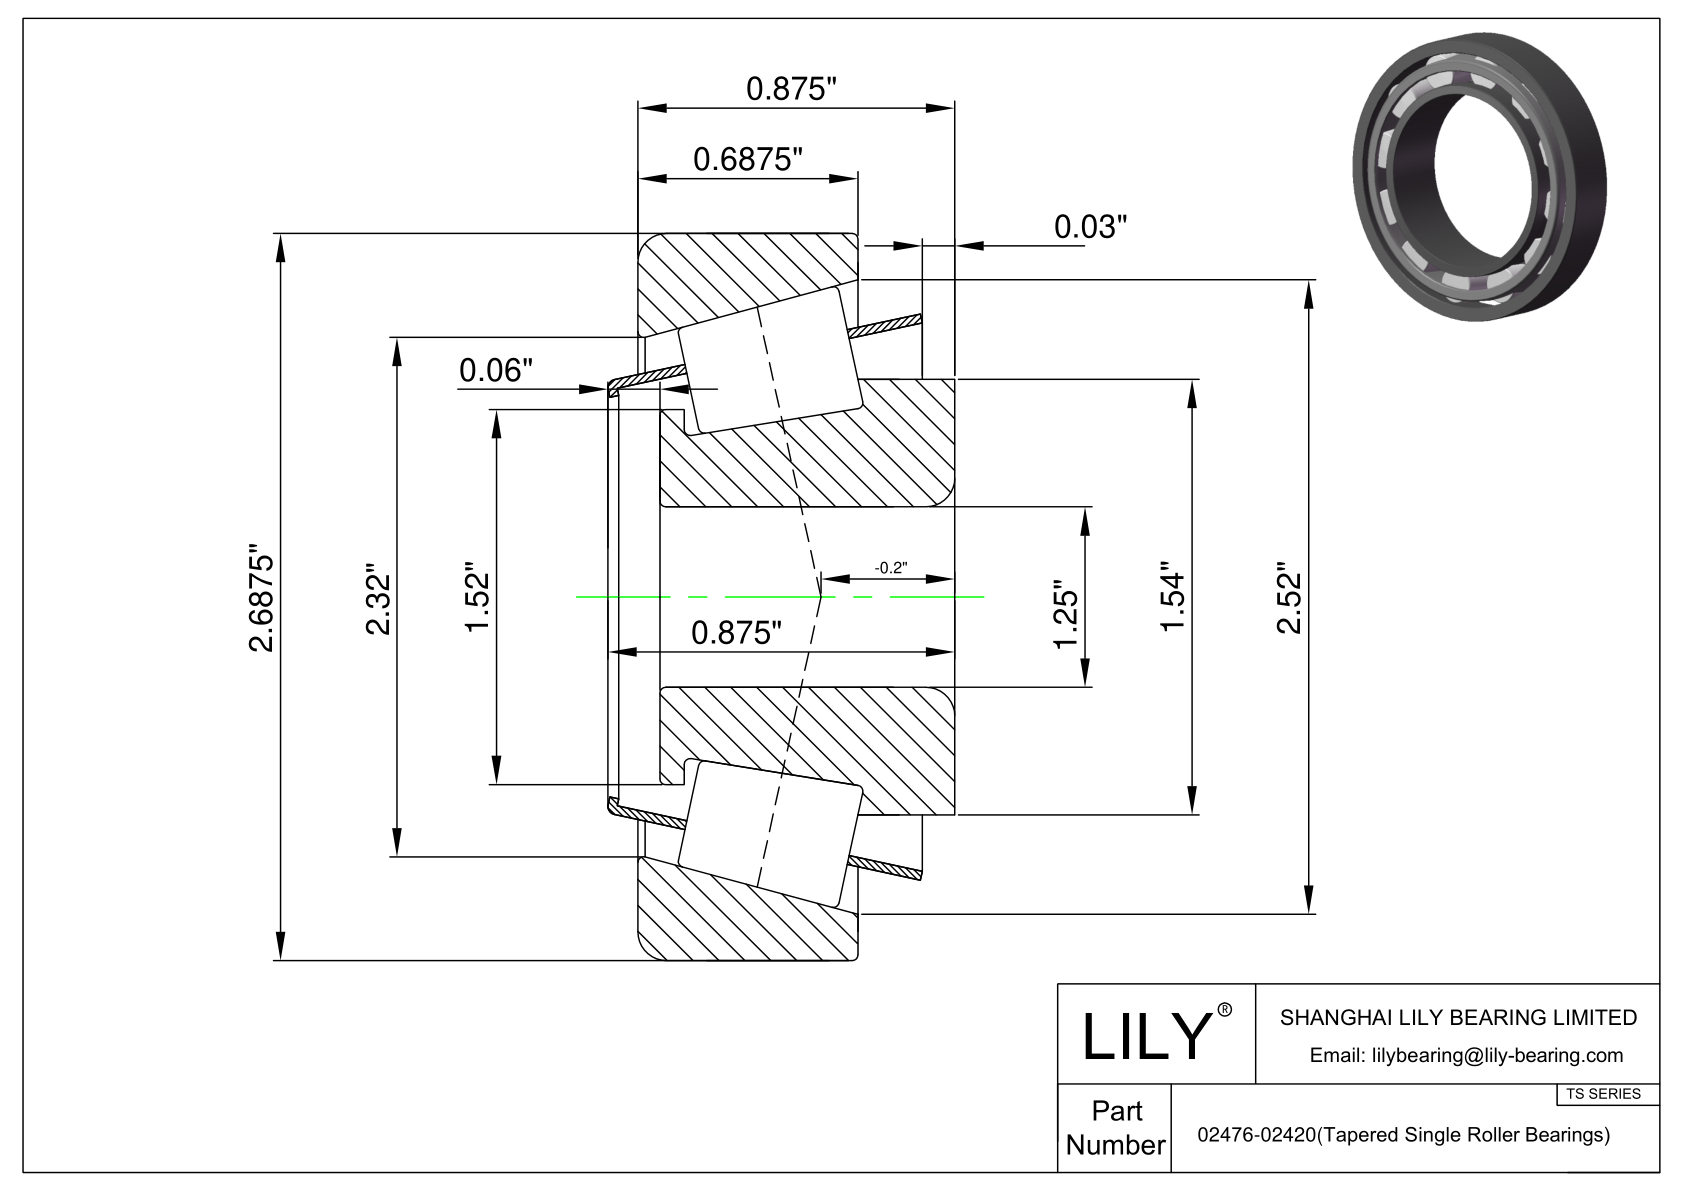 02476-02420 TS (Tapered Single Roller Bearings) (Imperial) cad drawing